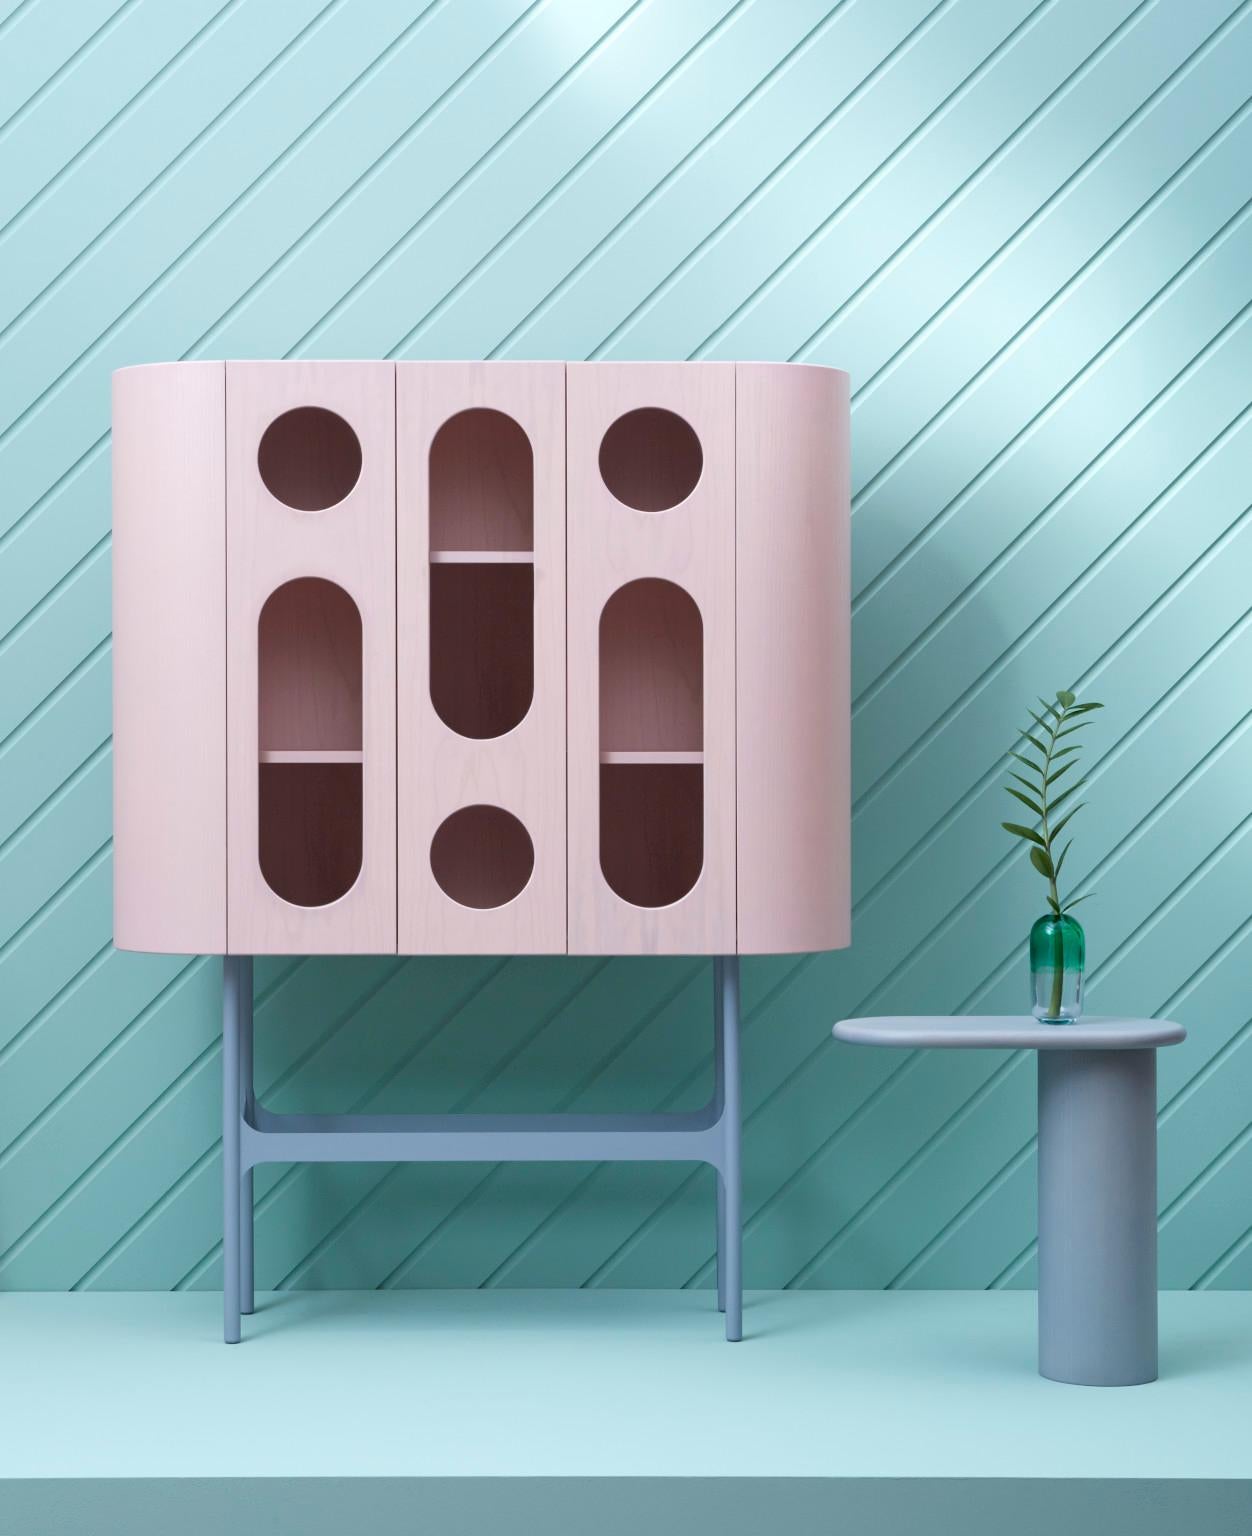 Oblò A Cabinet / Colorama Collection by Matteo Zorzenoni

Oblò is a collection of cabinets and cupboards with a strong personality. Circular and oblong holes covered in glass characterize the surface of the doors and allow a glimpse of what is